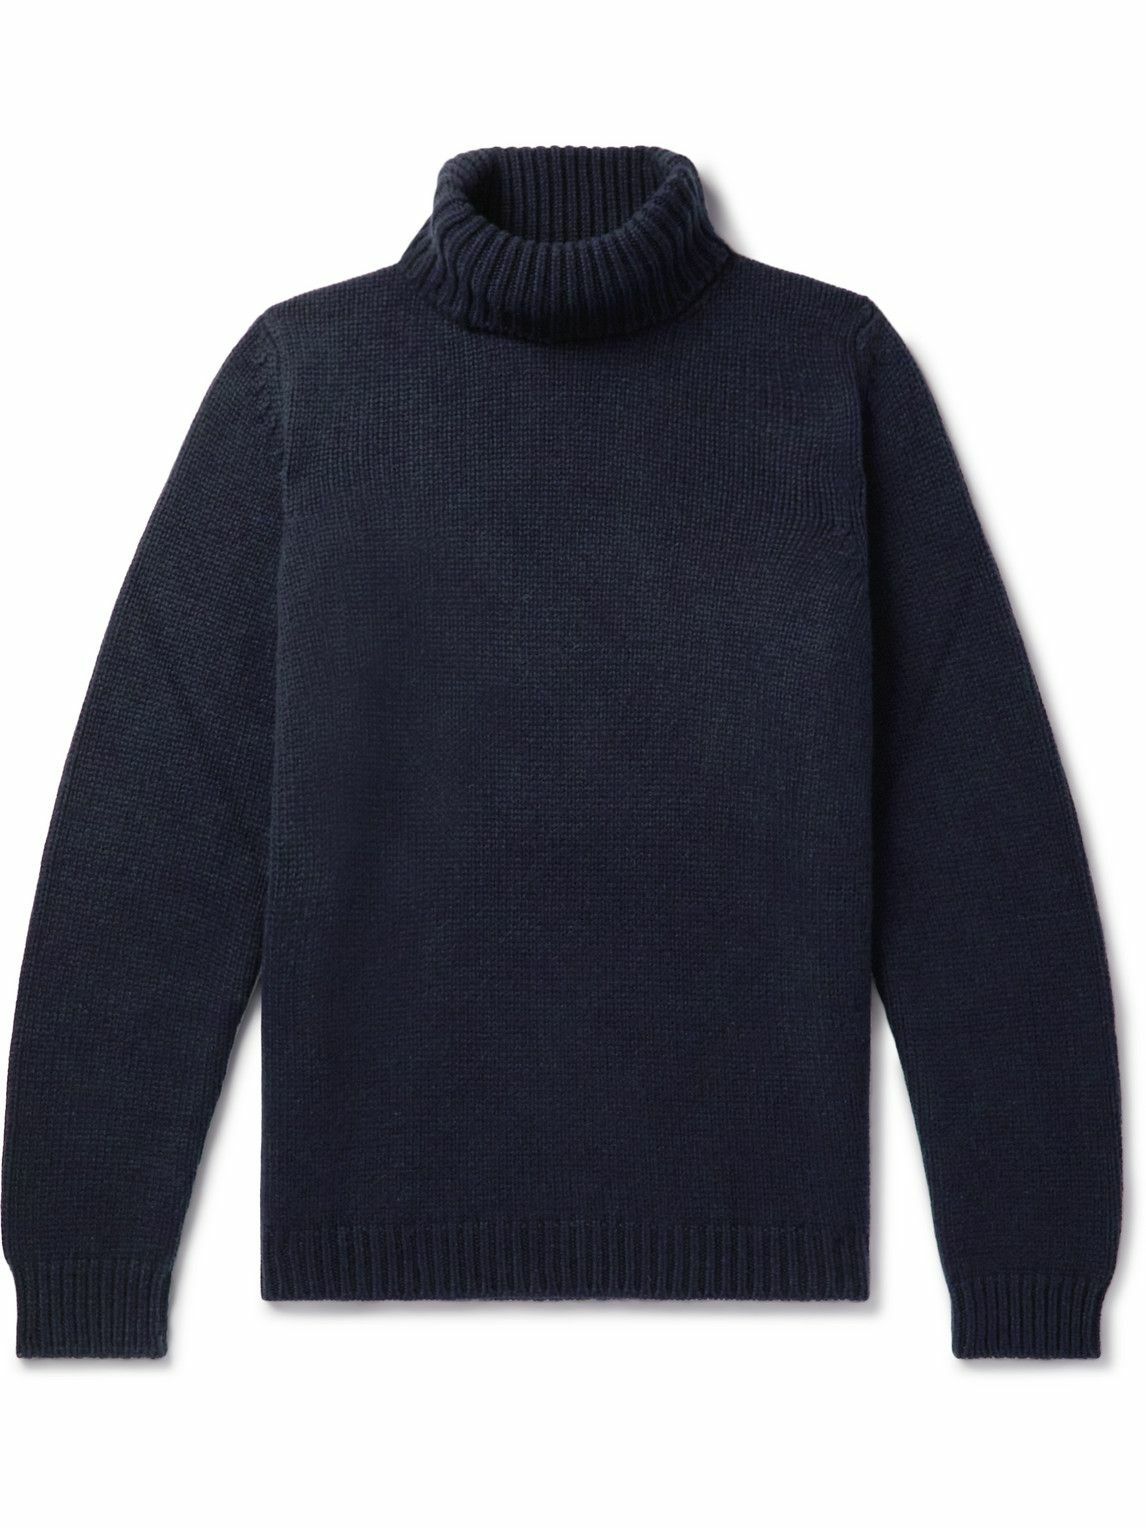 Anderson & Sheppard - Cashmere Turtleneck Sweater - Blue Anderson ...